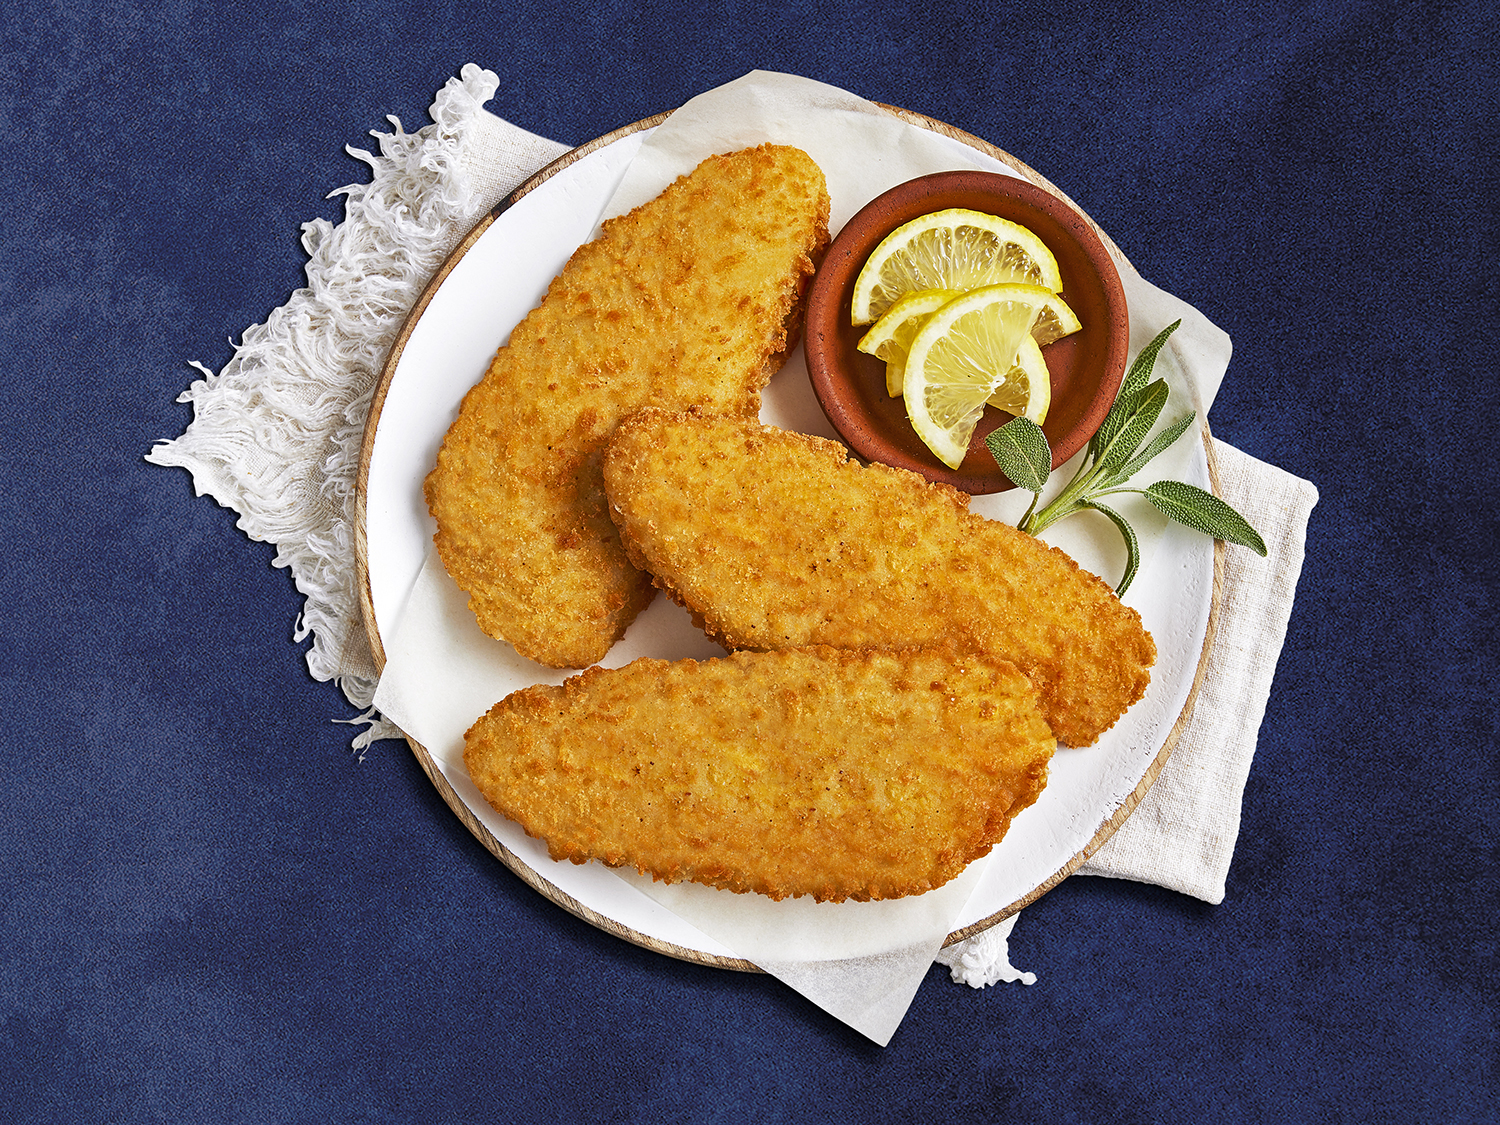 CRUMBED FISH MINCE PORTIONS